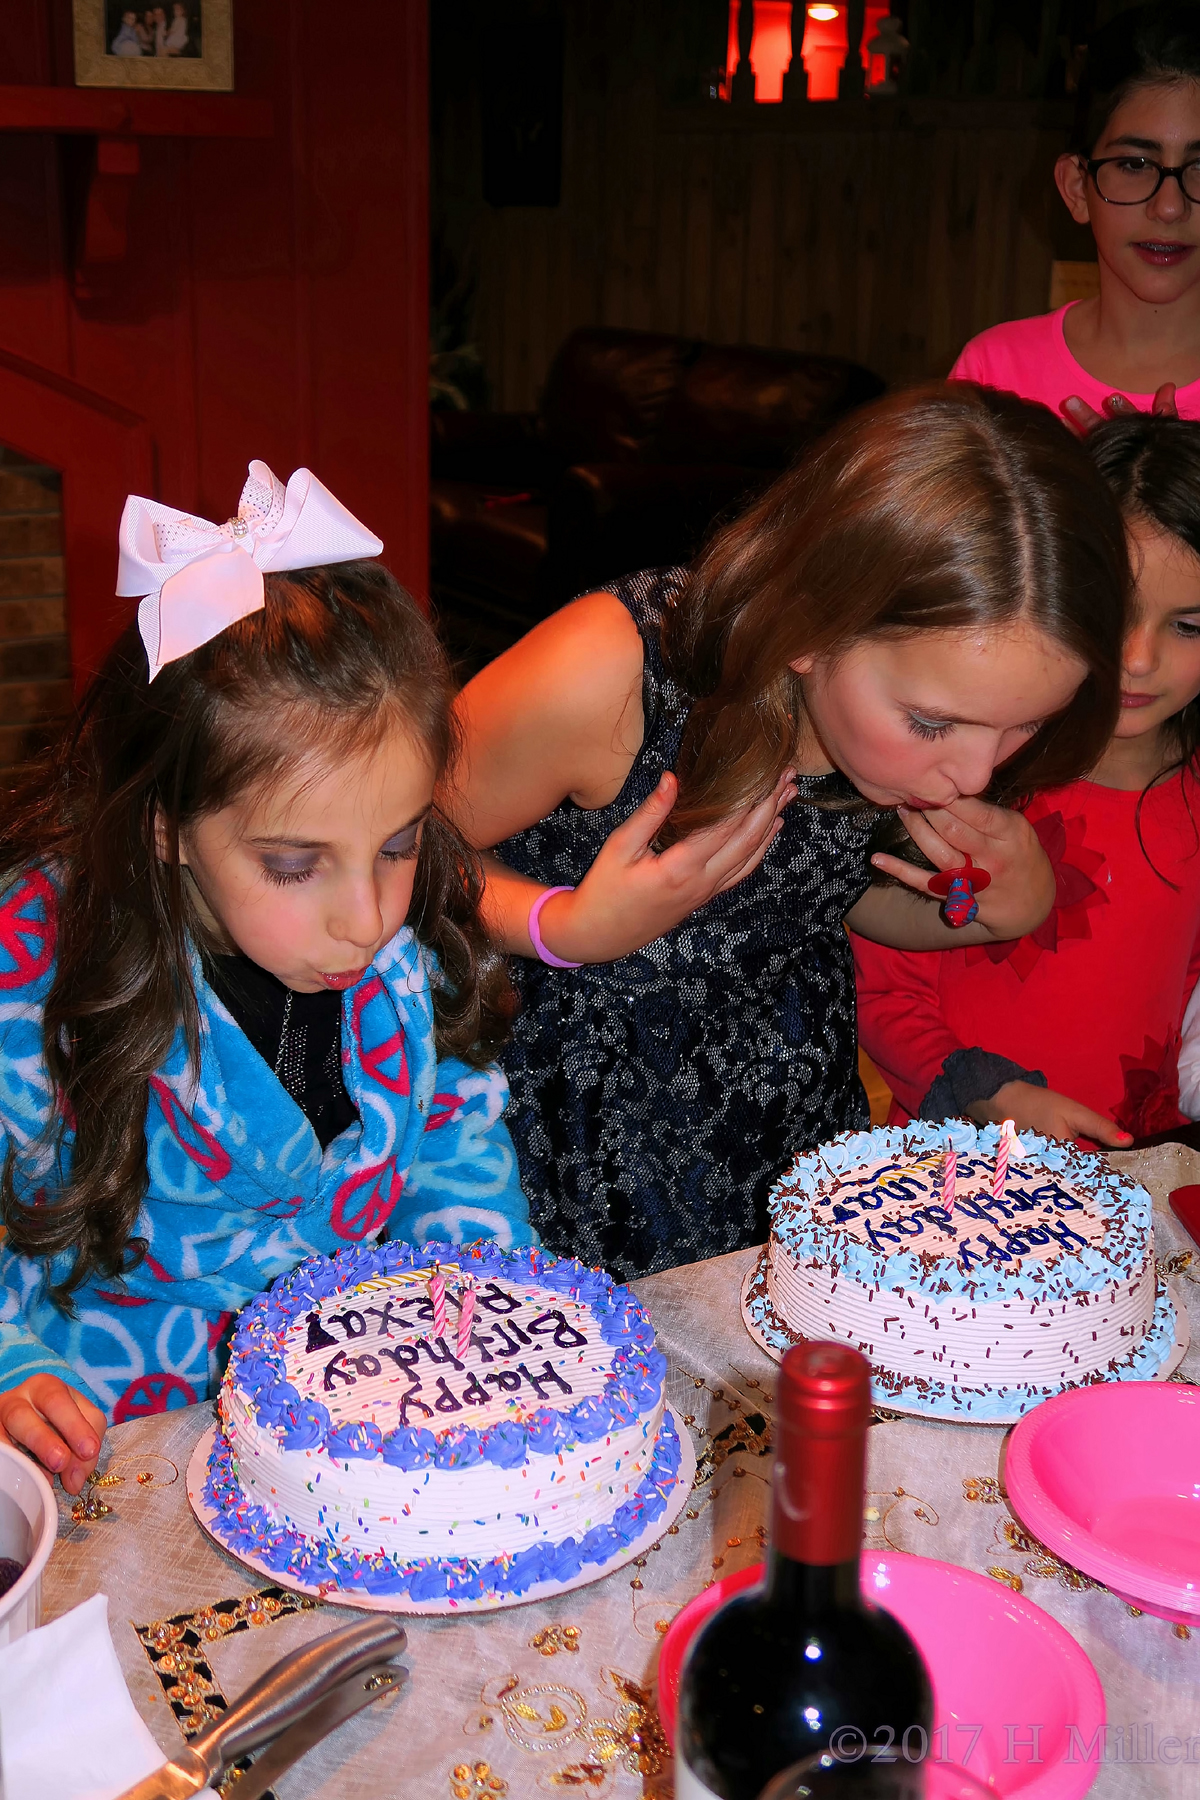 Alexa And Karina Blow Out The Candles On Their Spa Birthday Cakes! 